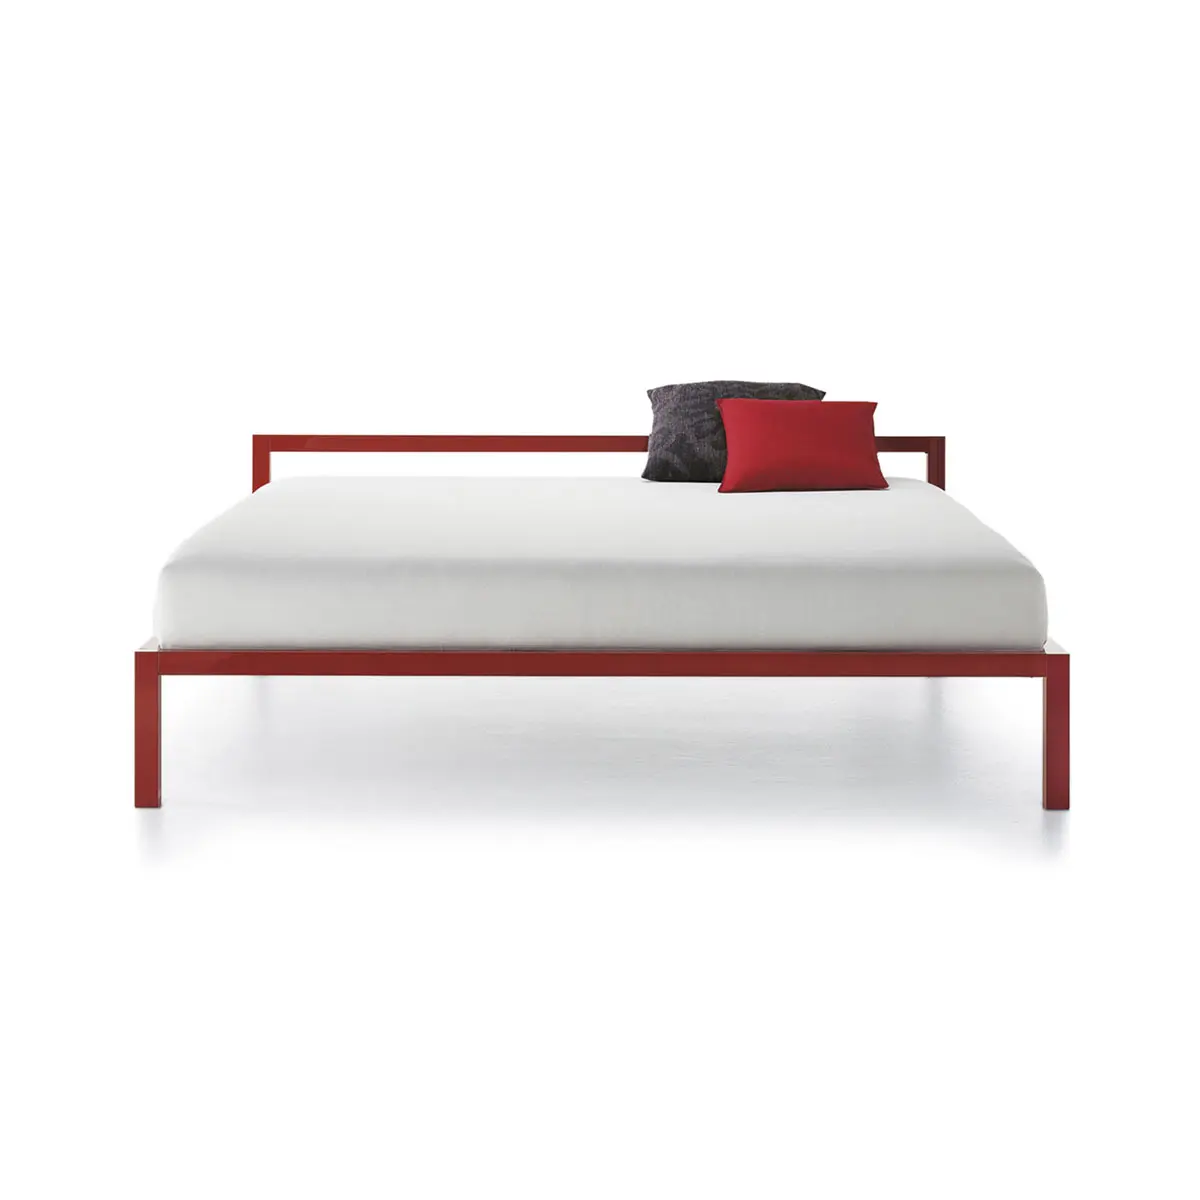 Aluminium Bed Italy ☞ Structure: Gloss Painted Red X065 ☞ Dimensions: 160 x 210 cm